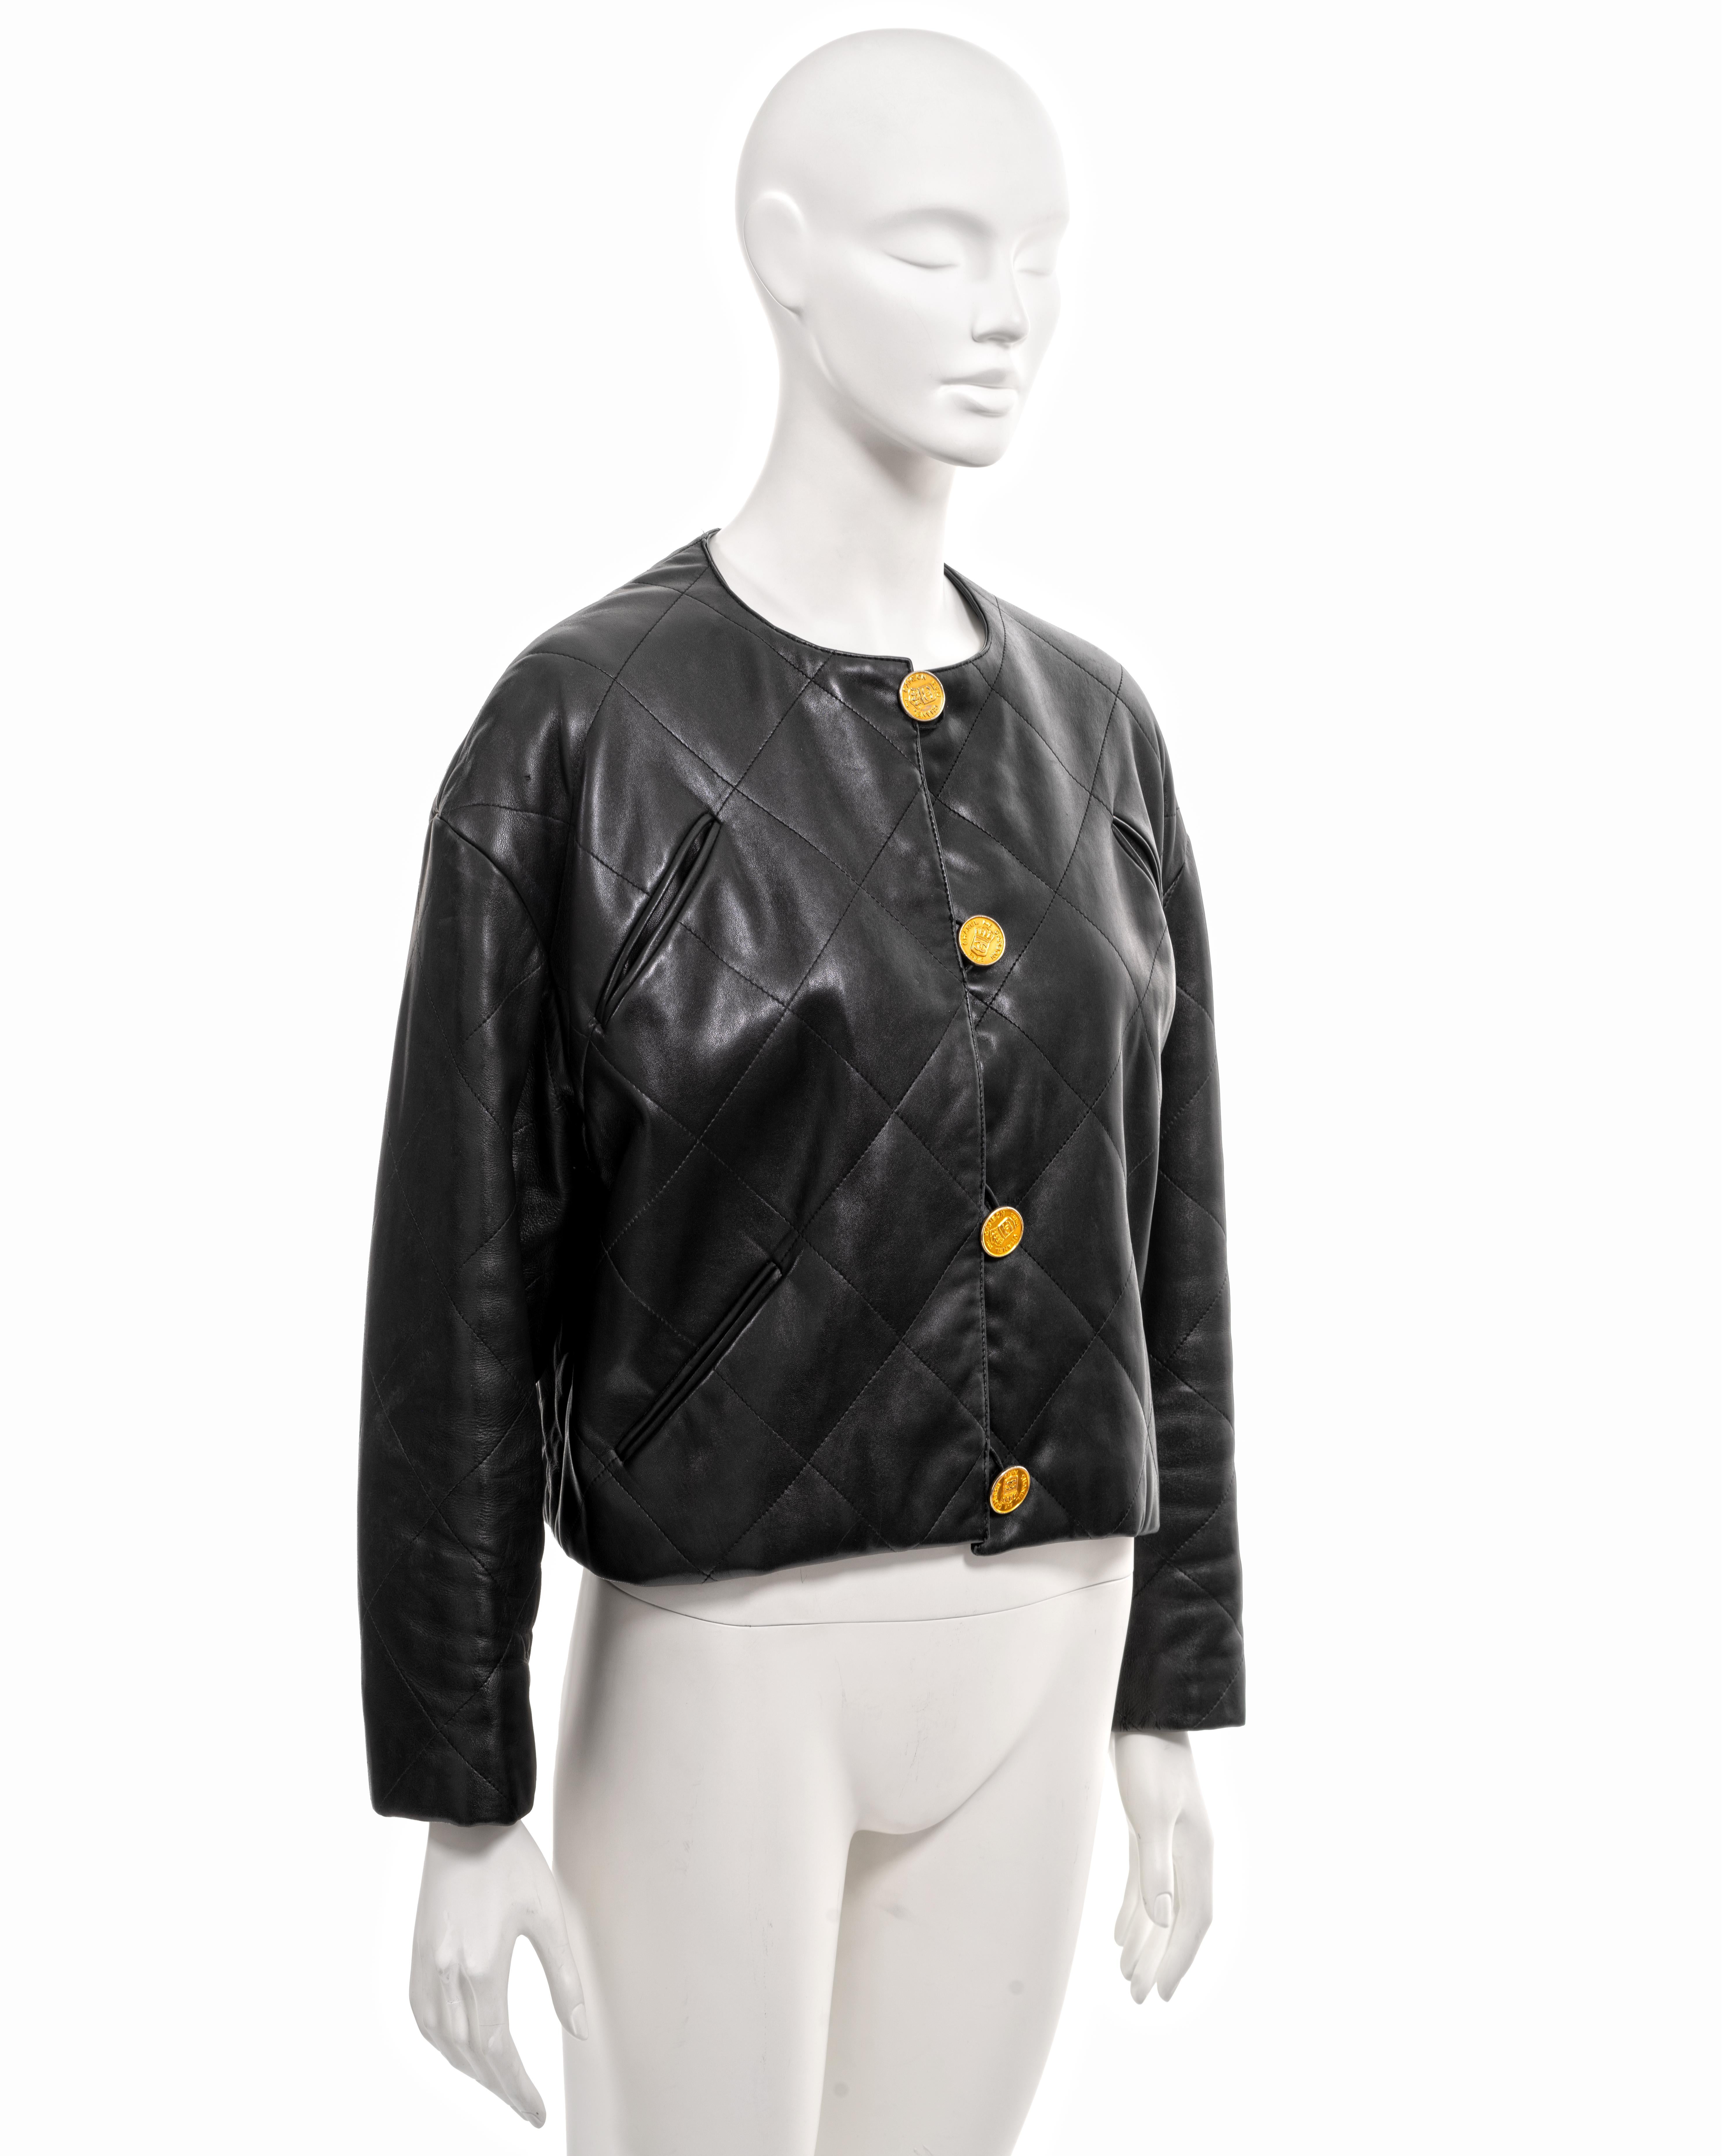 Chanel by Karl Lagerfeld black quilted lambskin leather jacket, fw 1987 2